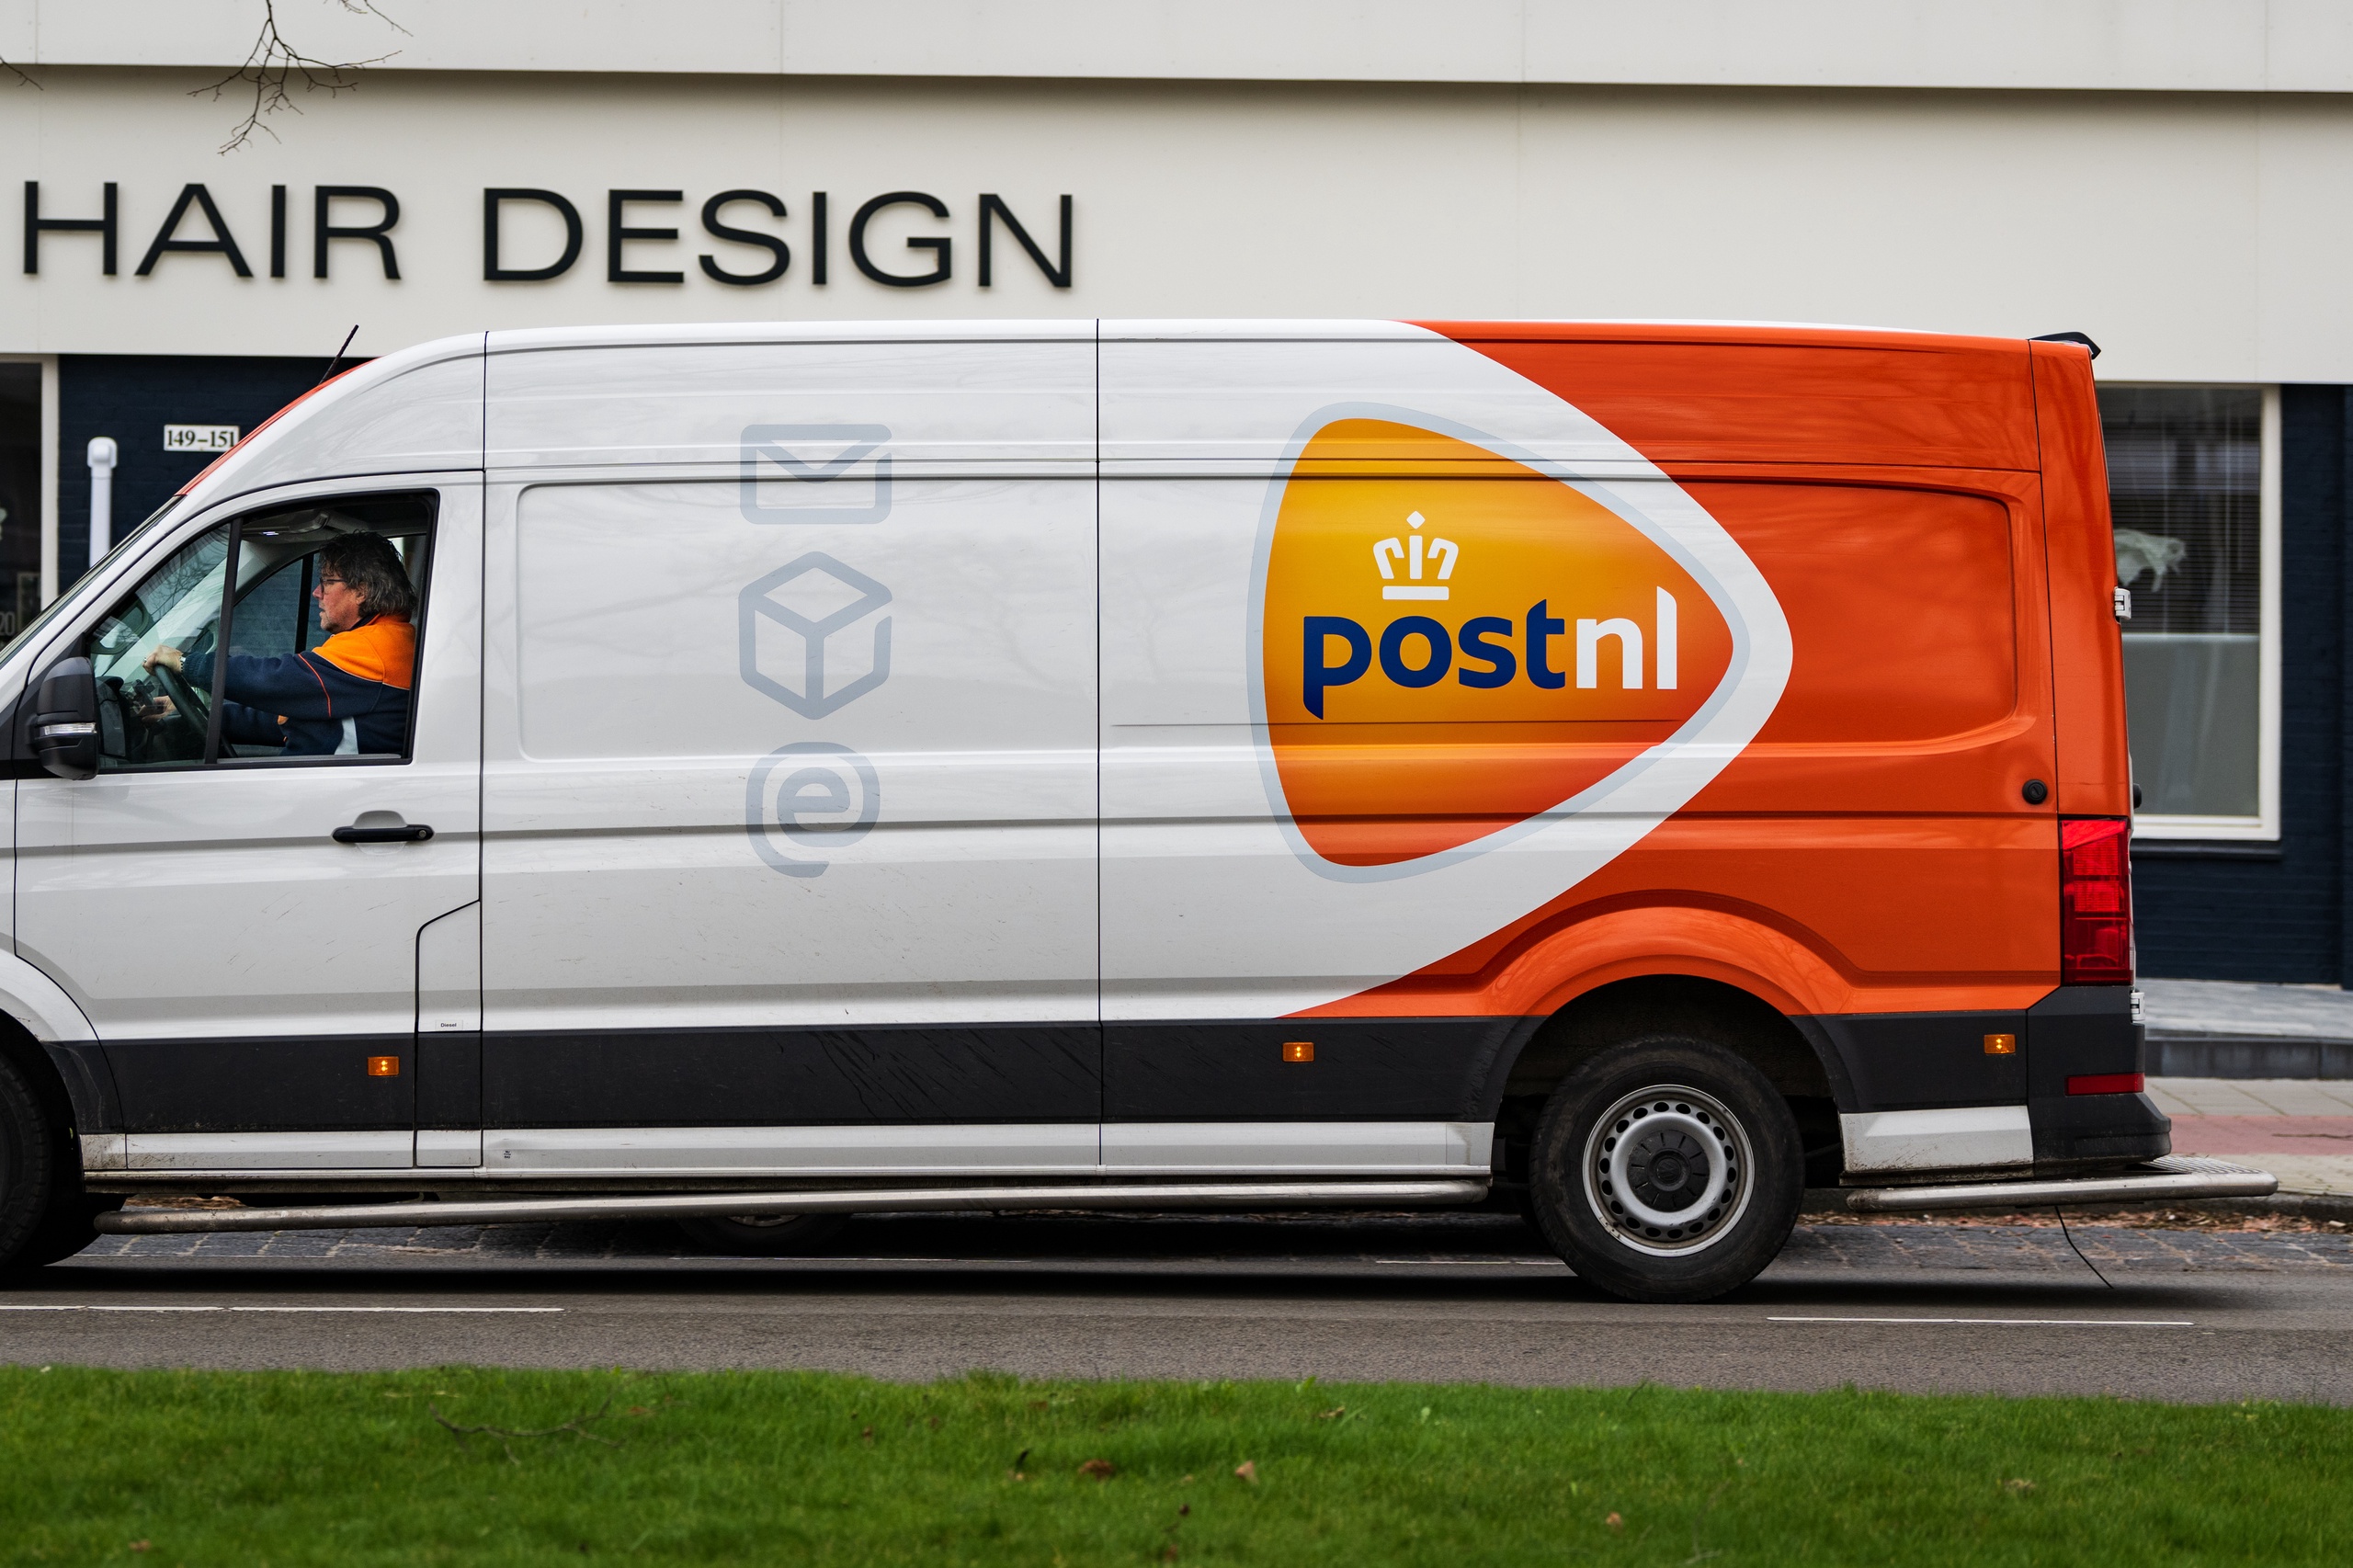 Although PostNL plans to cut more than two to three hundred jobs in 2023, according to Professor Arnoud Boot, this should be seen as an opportunity for the rest of the economy.  'The Dutch economy has essentially been short of people for 25 years, so we need to start thinking about how we use people's supply.'